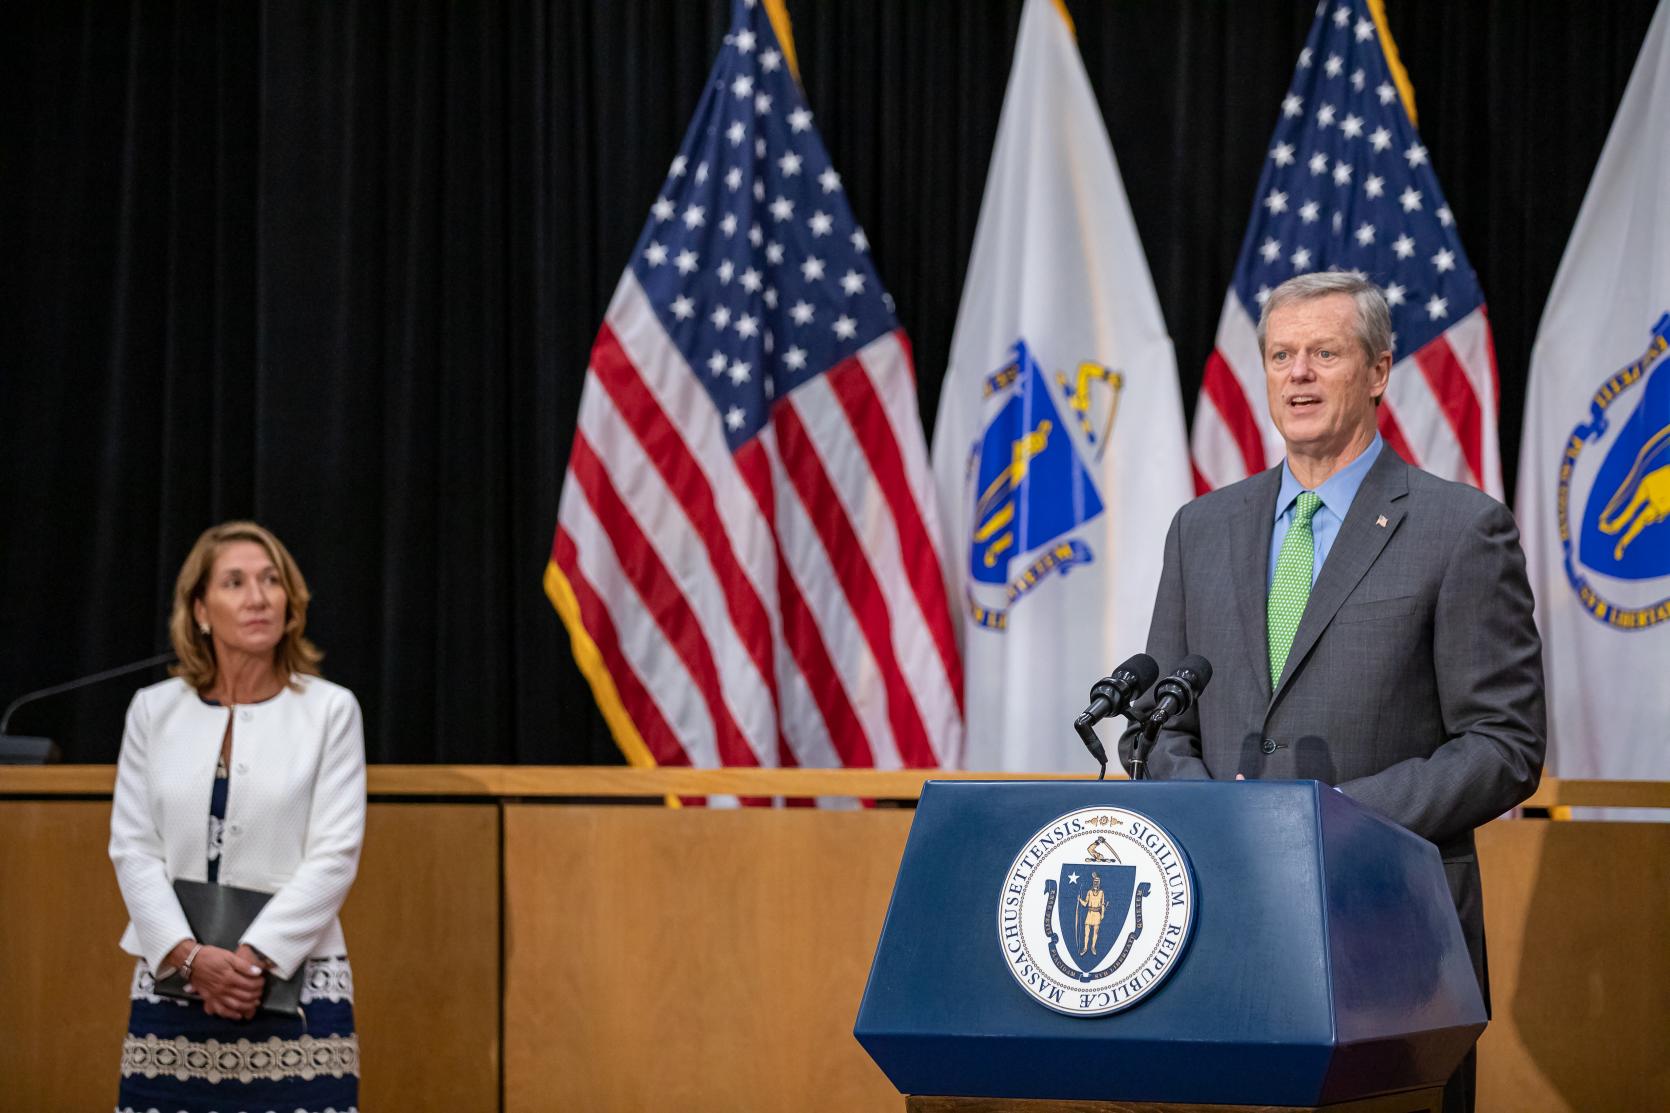 Baker-Polito Administration Announces New Initiatives to Stop Spread of COVID-19